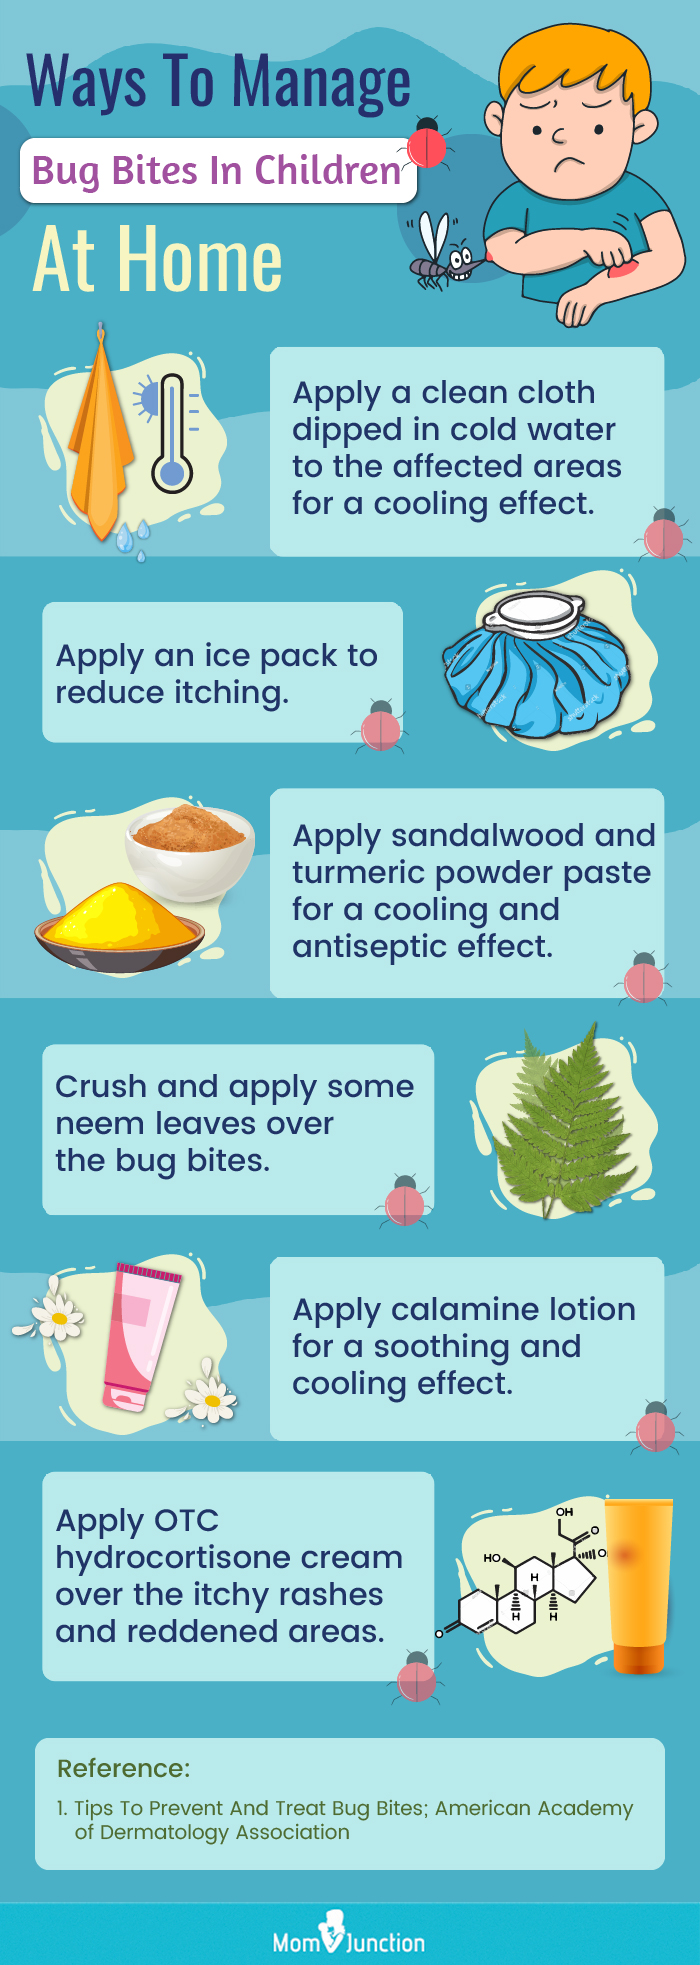 ways to manage bug bites in children at home (infographic)